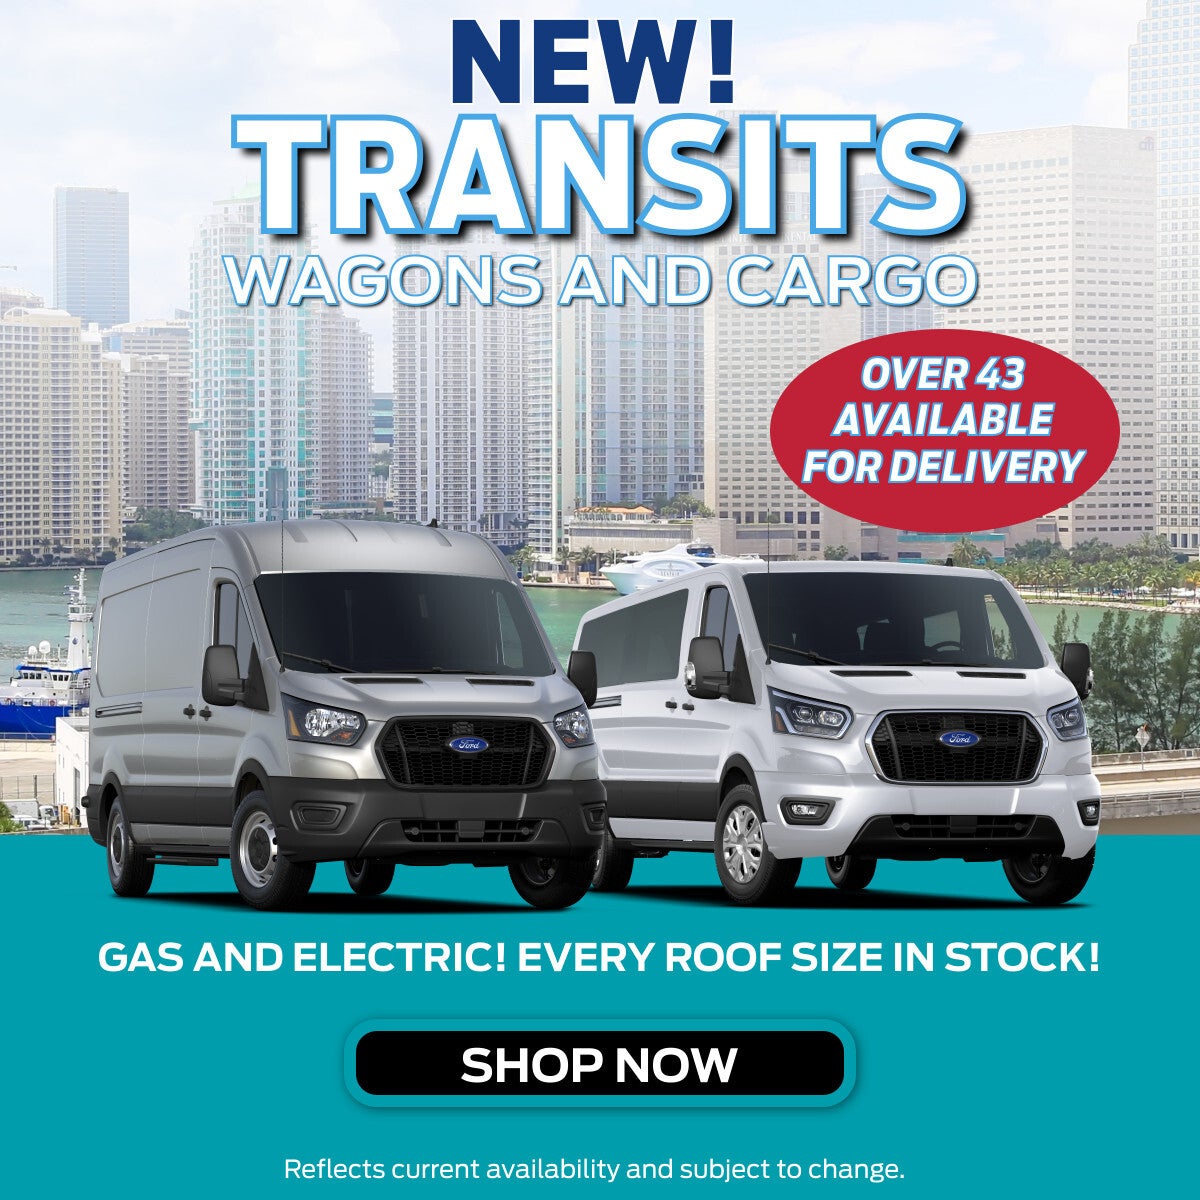 New Transits Wagons and Cargo